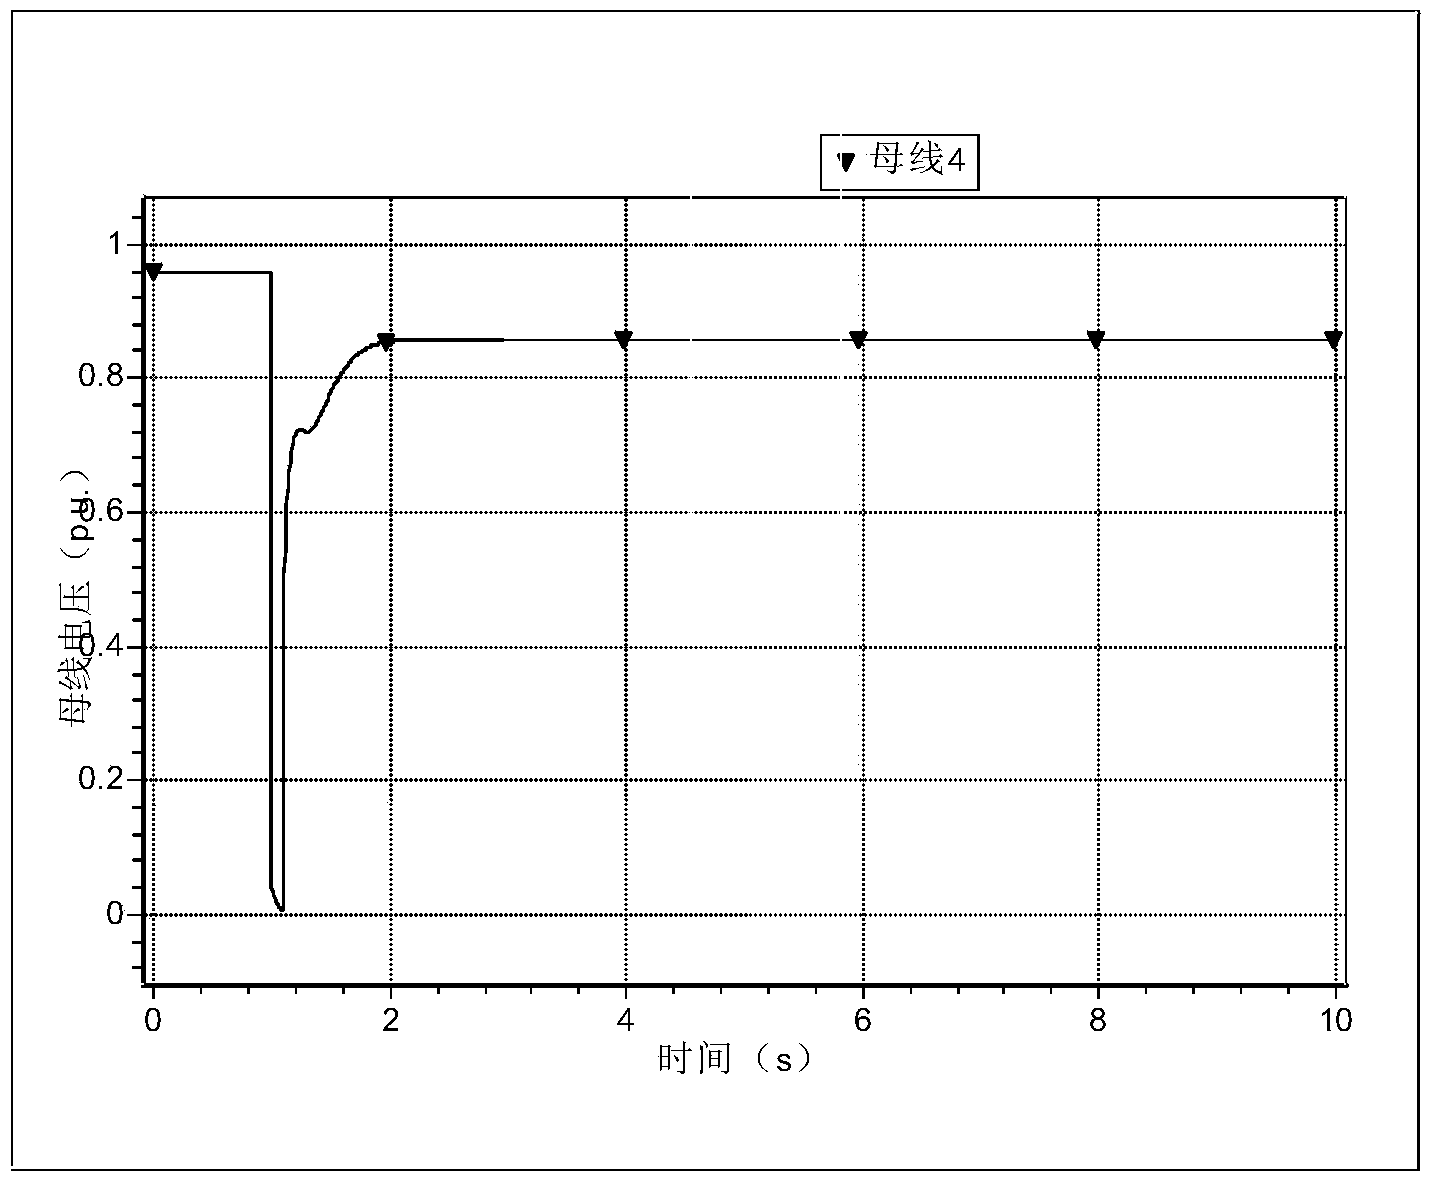 Transient voltage stability quantitative evaluation method based on equivalent impedance of critical system